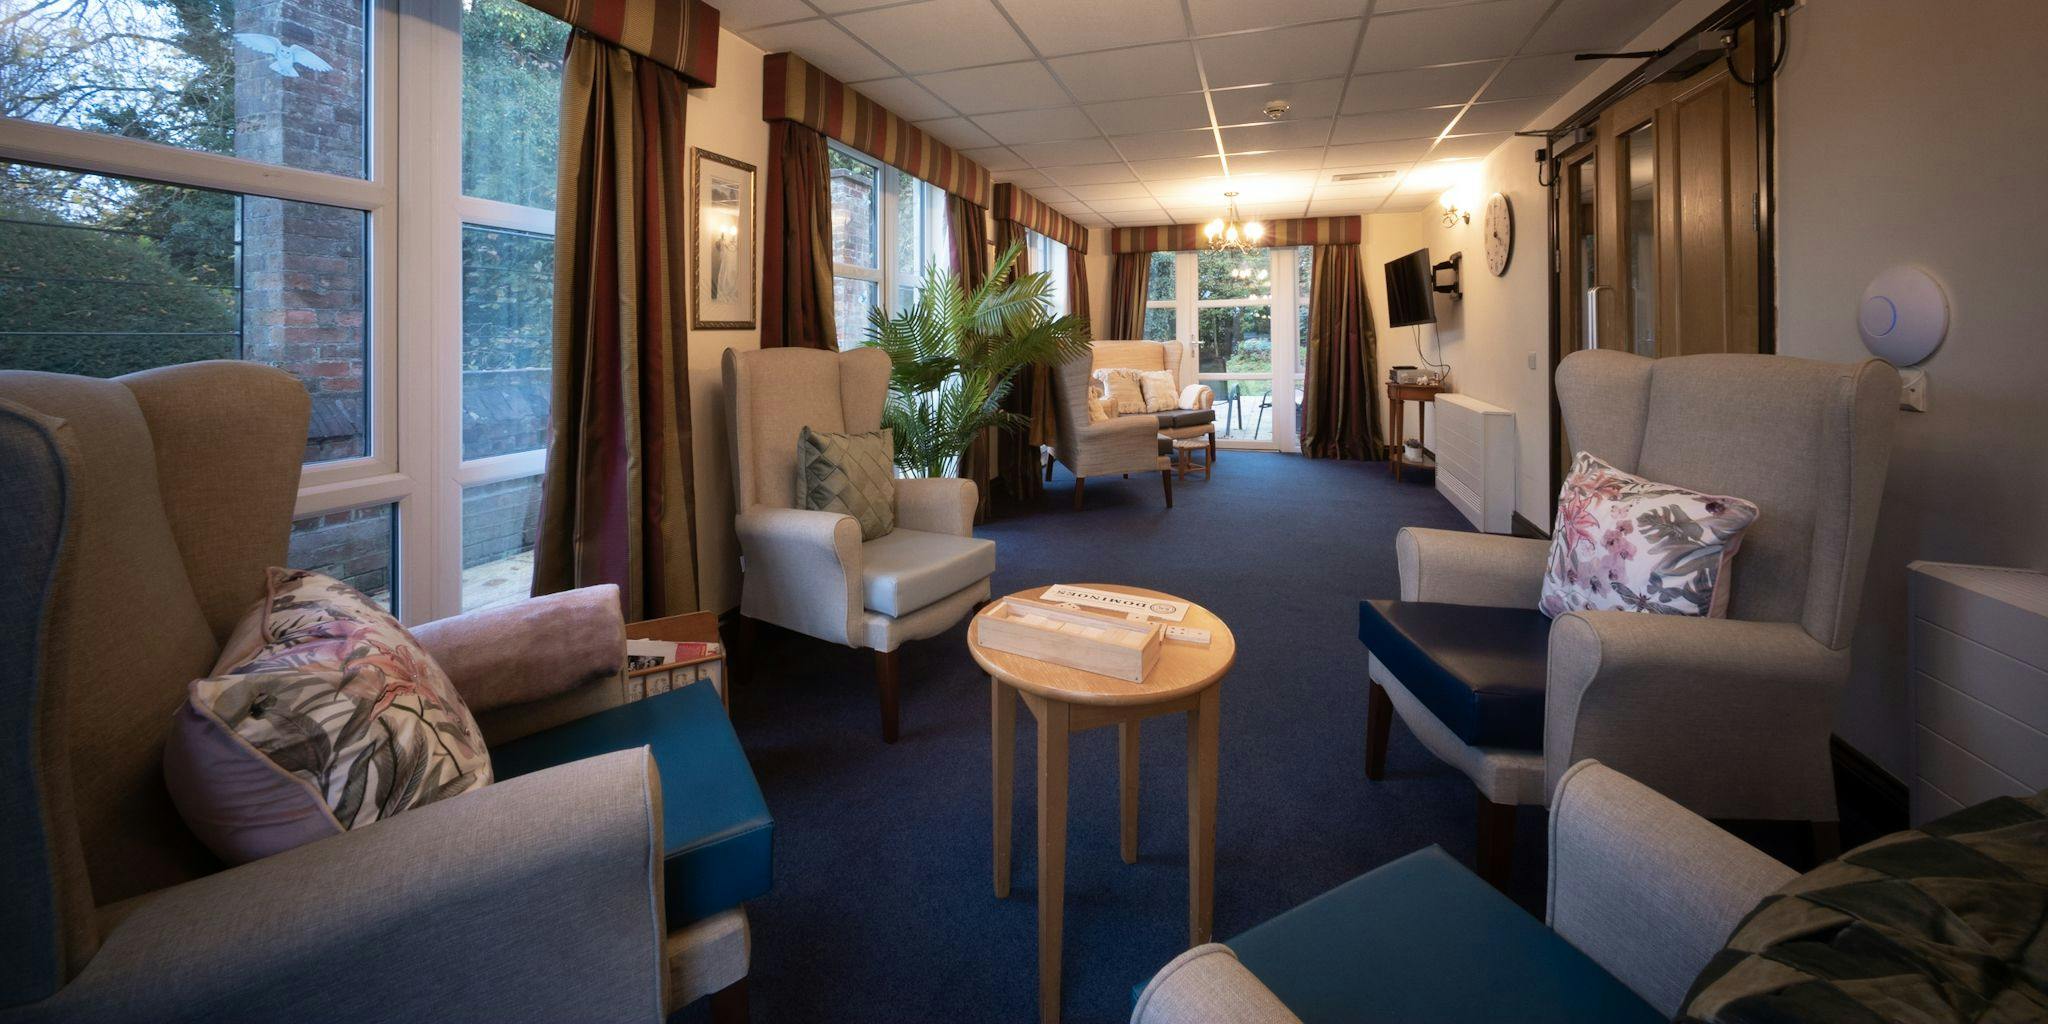 Independent Care Home - Longbridge Deverill House care home 4